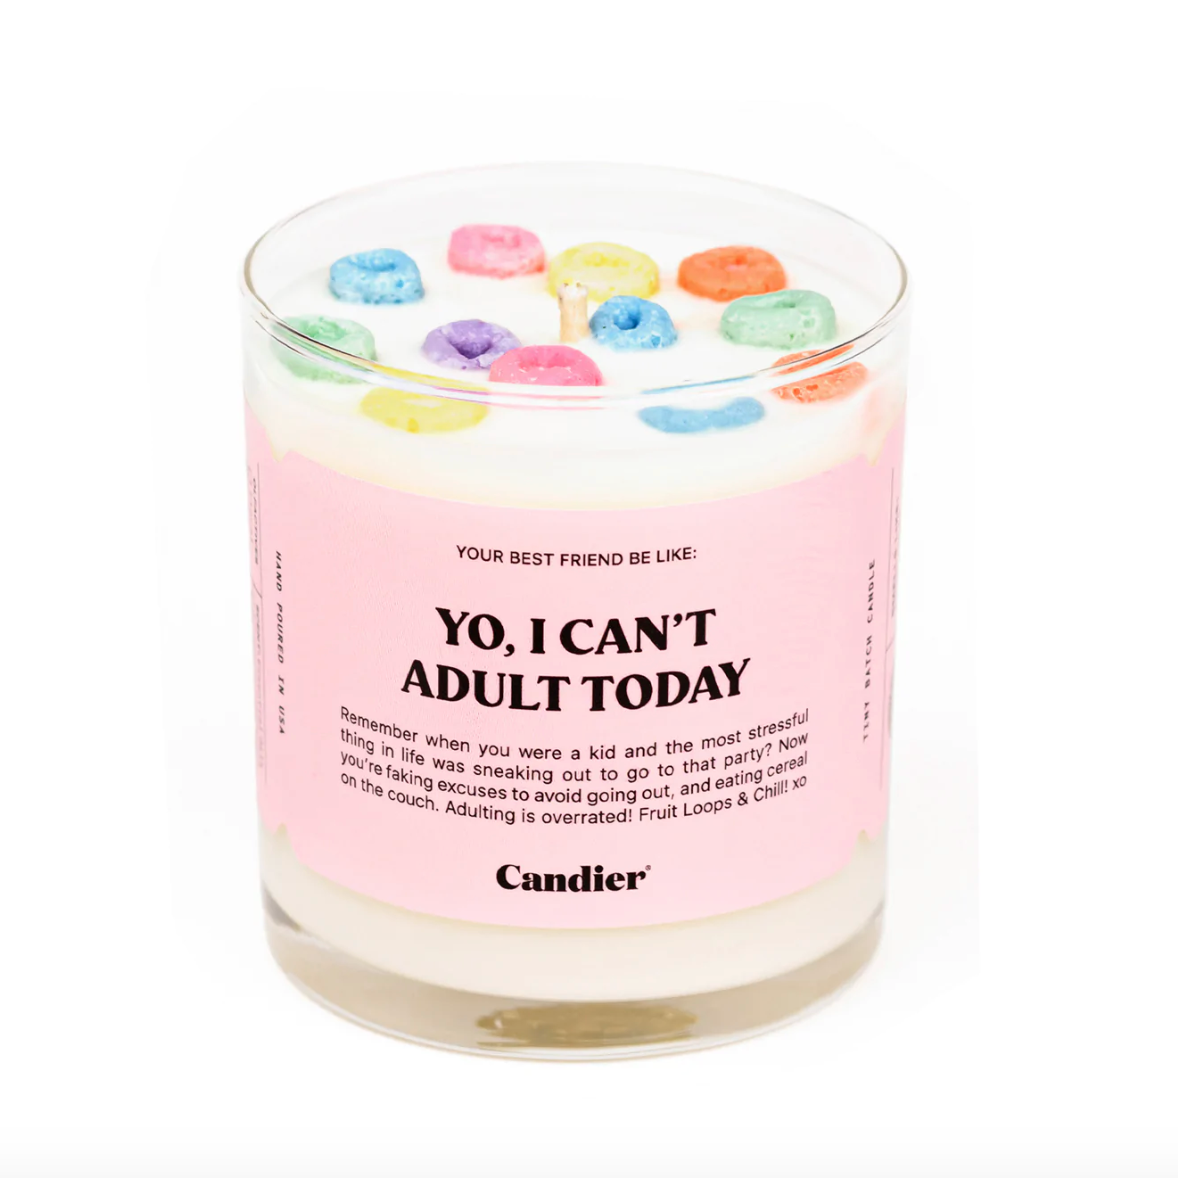 products/YoICan_tAdultTodayCandleXOMarshmallow-1.png